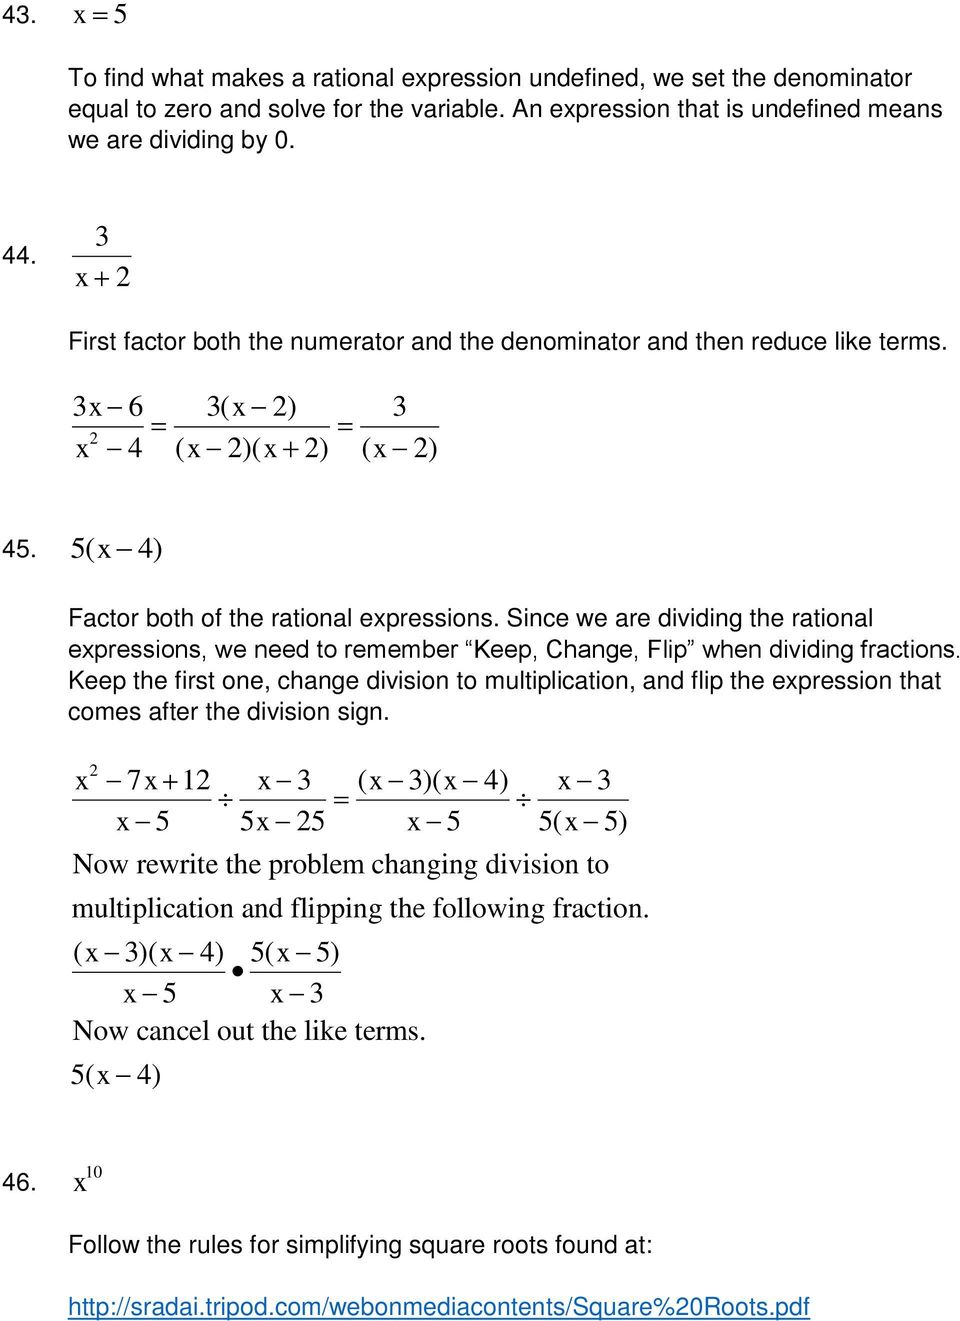 Since we are dividing the rational epressions, we need to remember Keep, Change, Flip when dividing fractions.